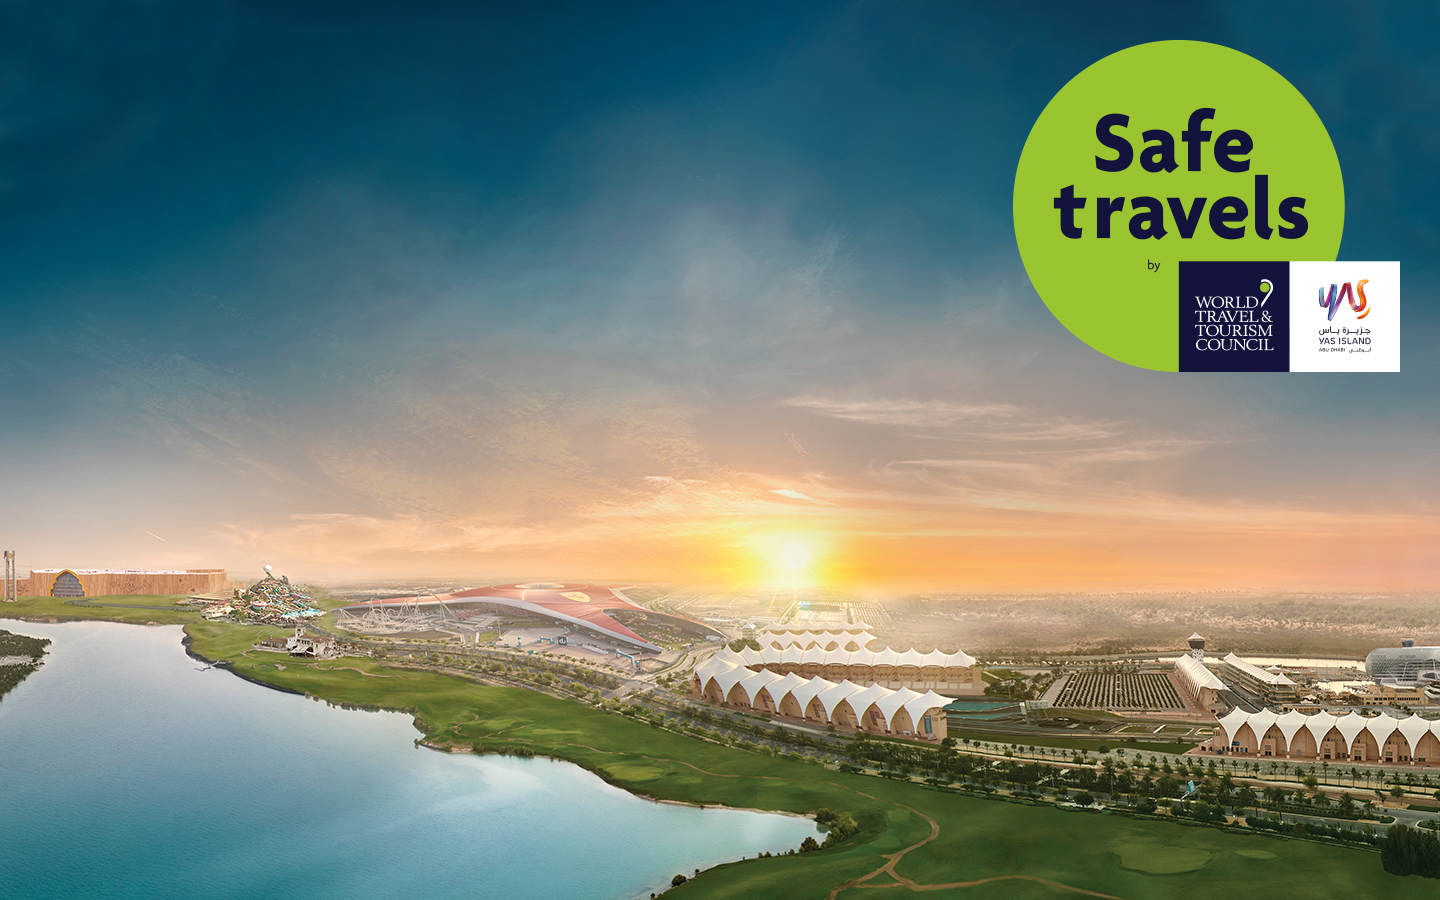 Yas Island First Destination In Abu Dhabi To Be Awarded Coveted WTTC ‘Safe Travels’ Stamp